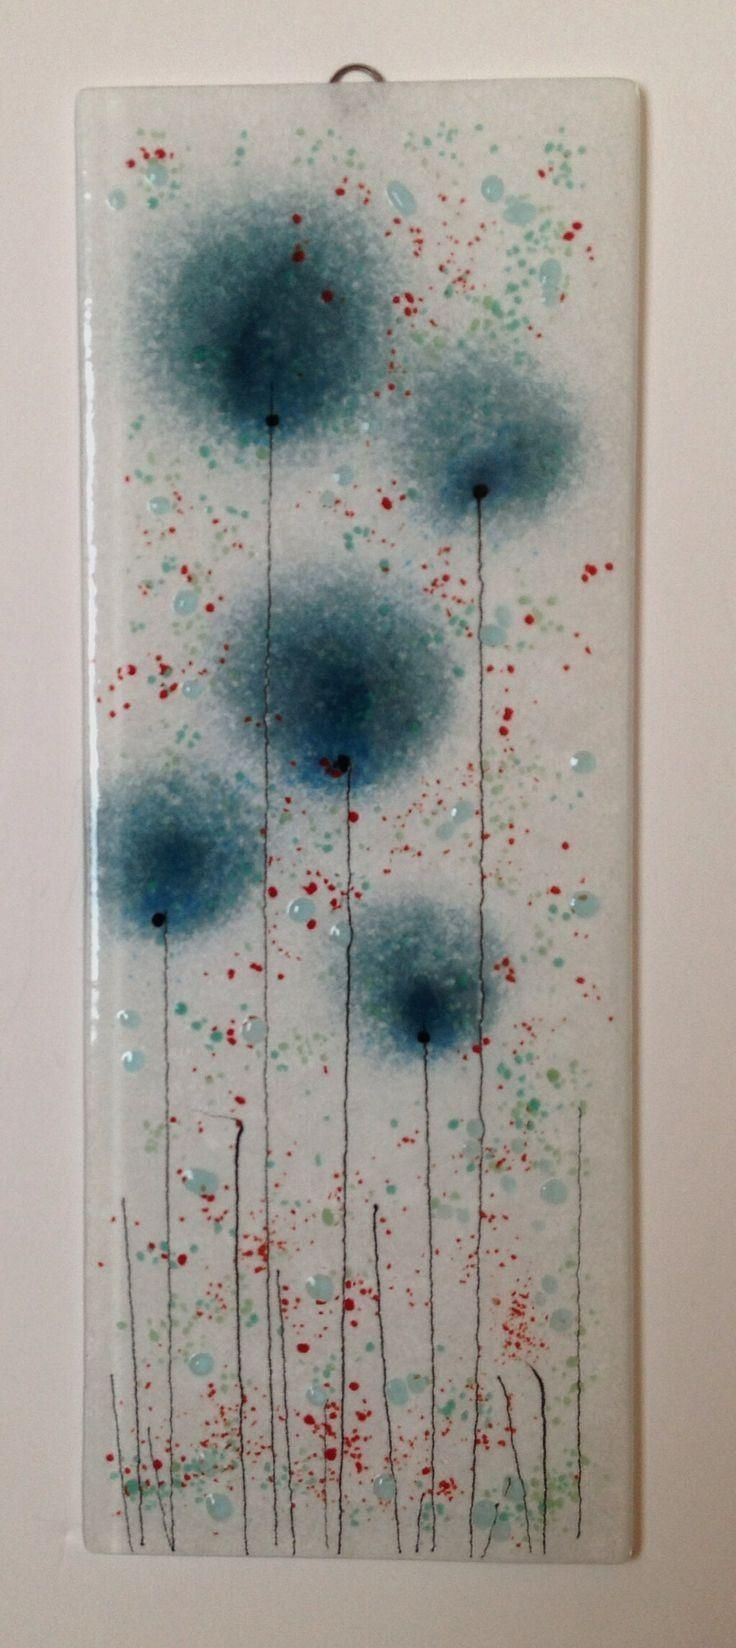 1315 Best Fused Glass Images On Pinterest | Fused Glass, Stained For Abstract Fused Glass Wall Art (Photo 11 of 20)